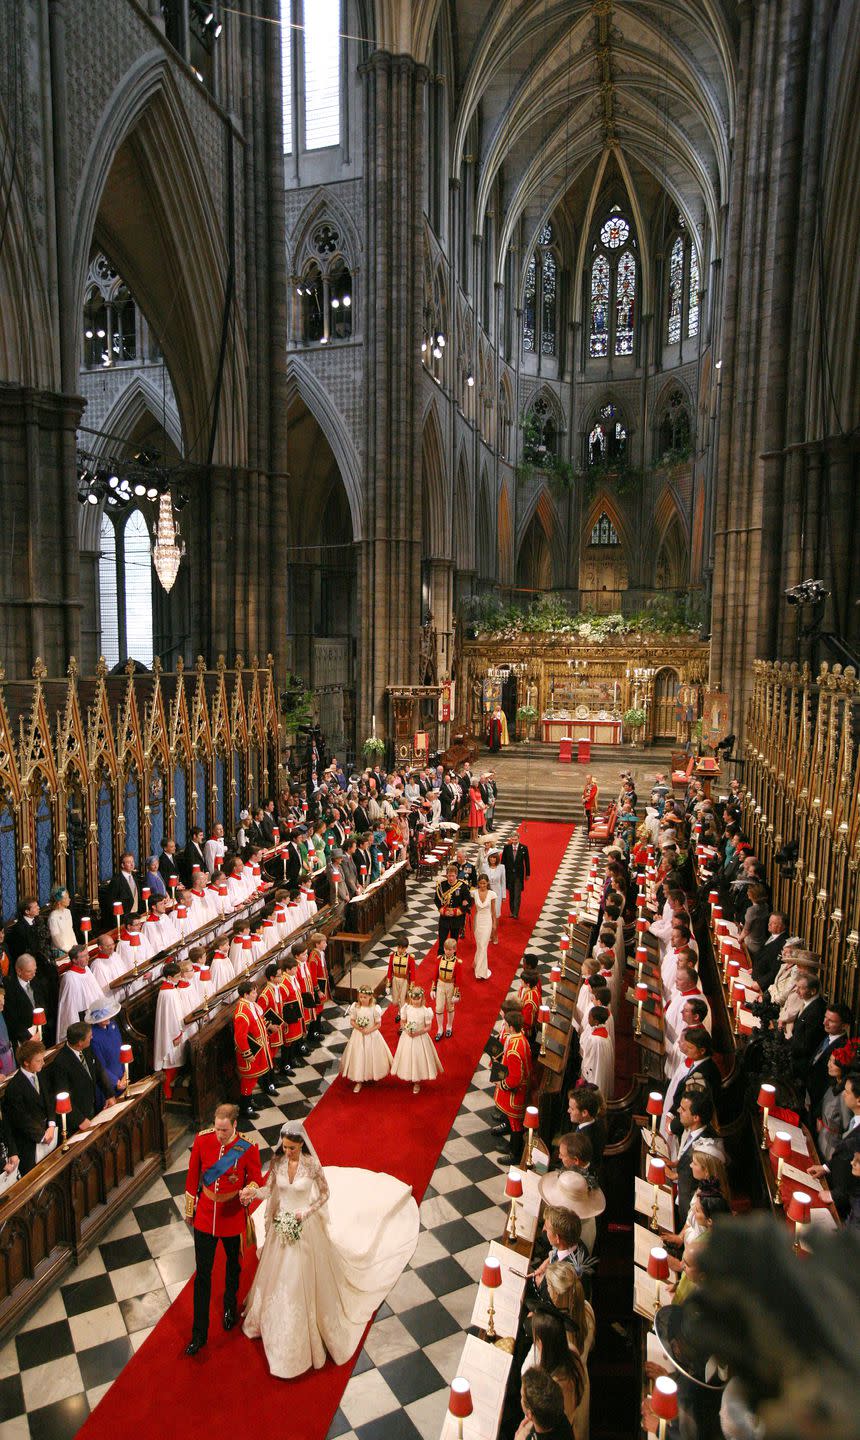 Will and Kate had it in Westminster Abbey.